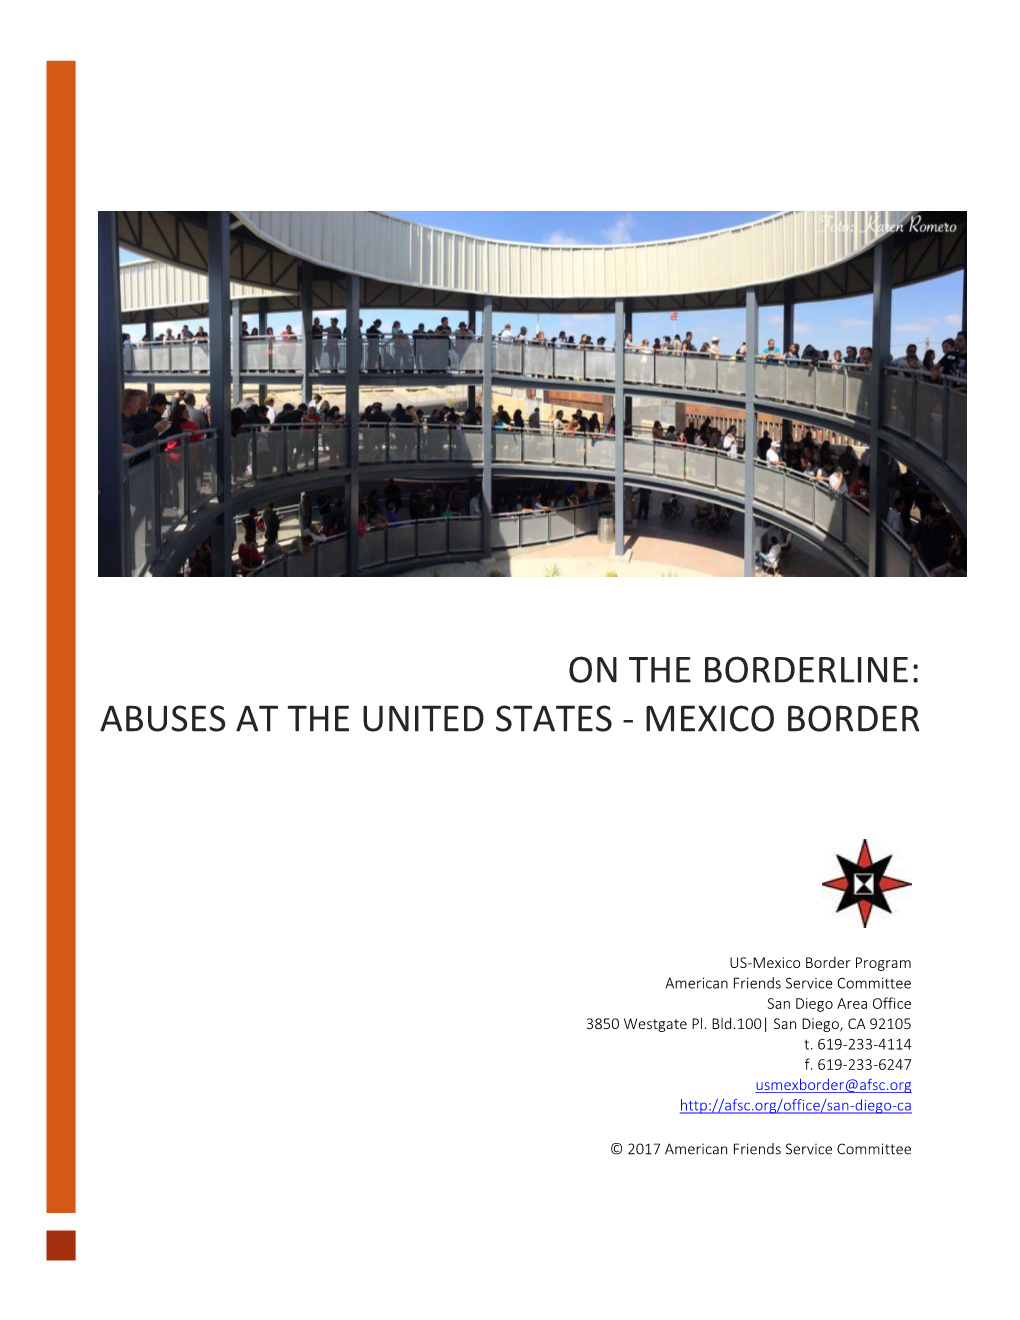 On the Borderline: Abuses at the United States - Mexico Border